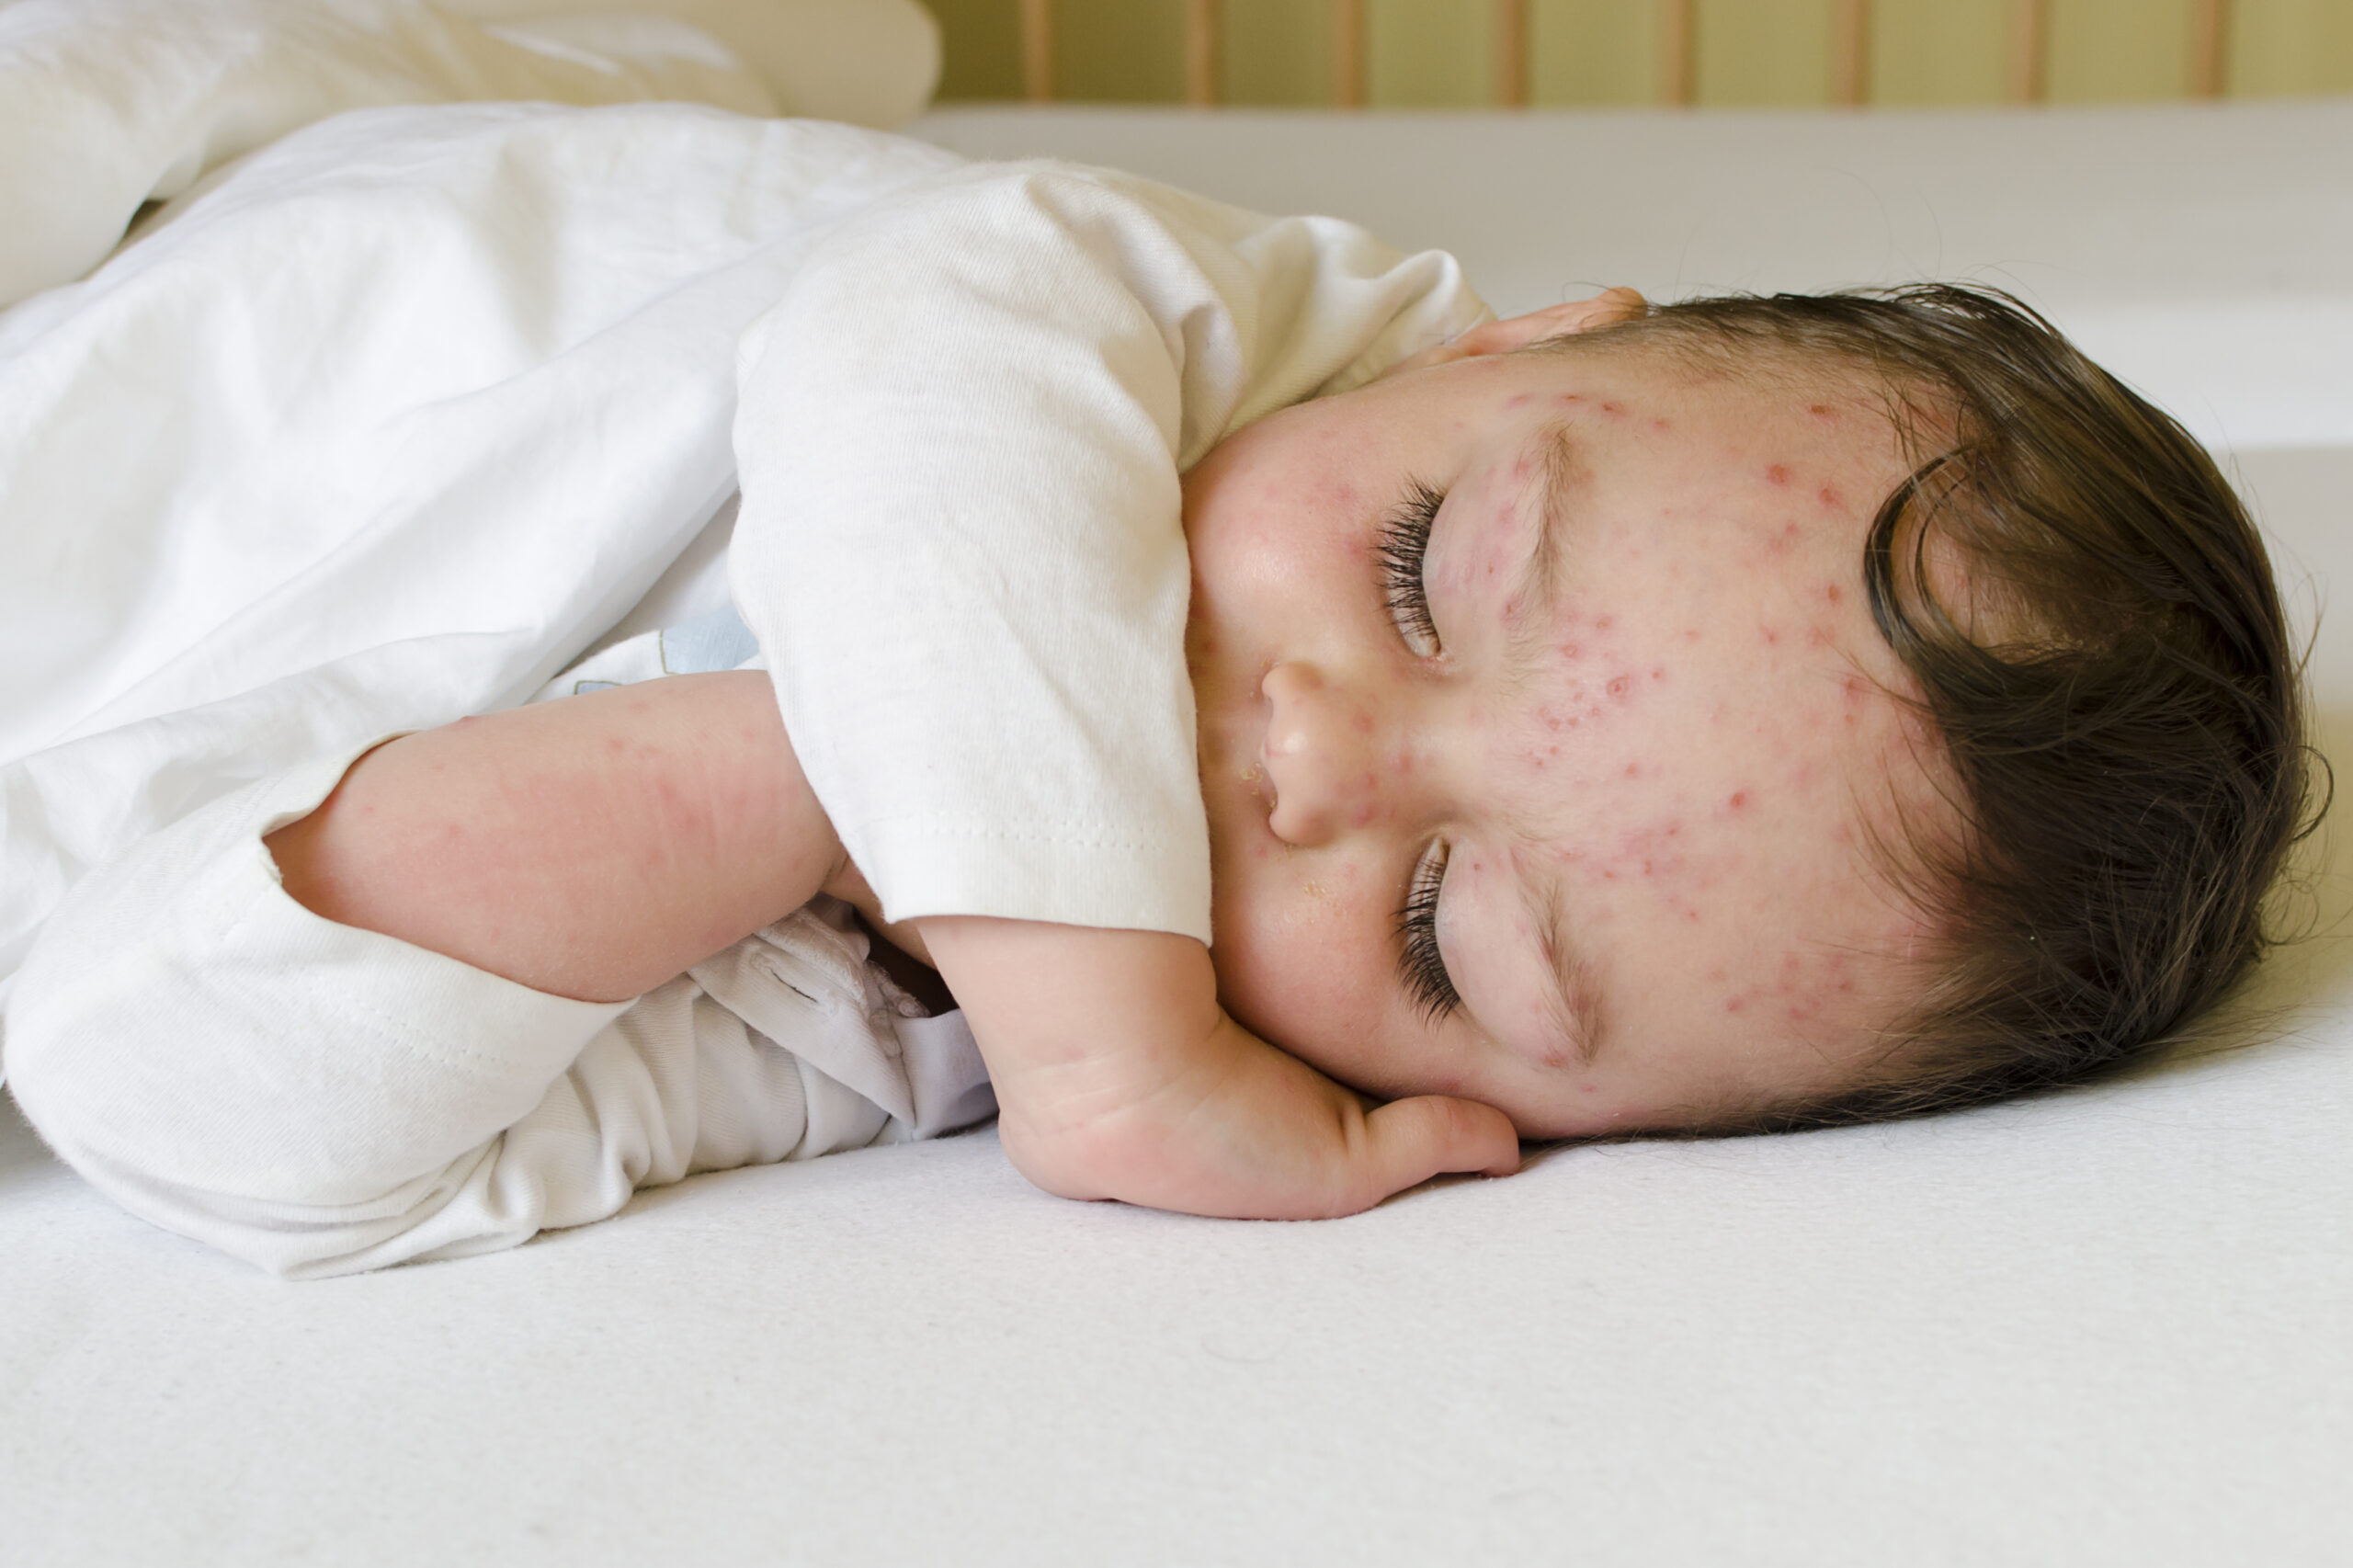 It’s not a good idea to just let your kids get chickenpox